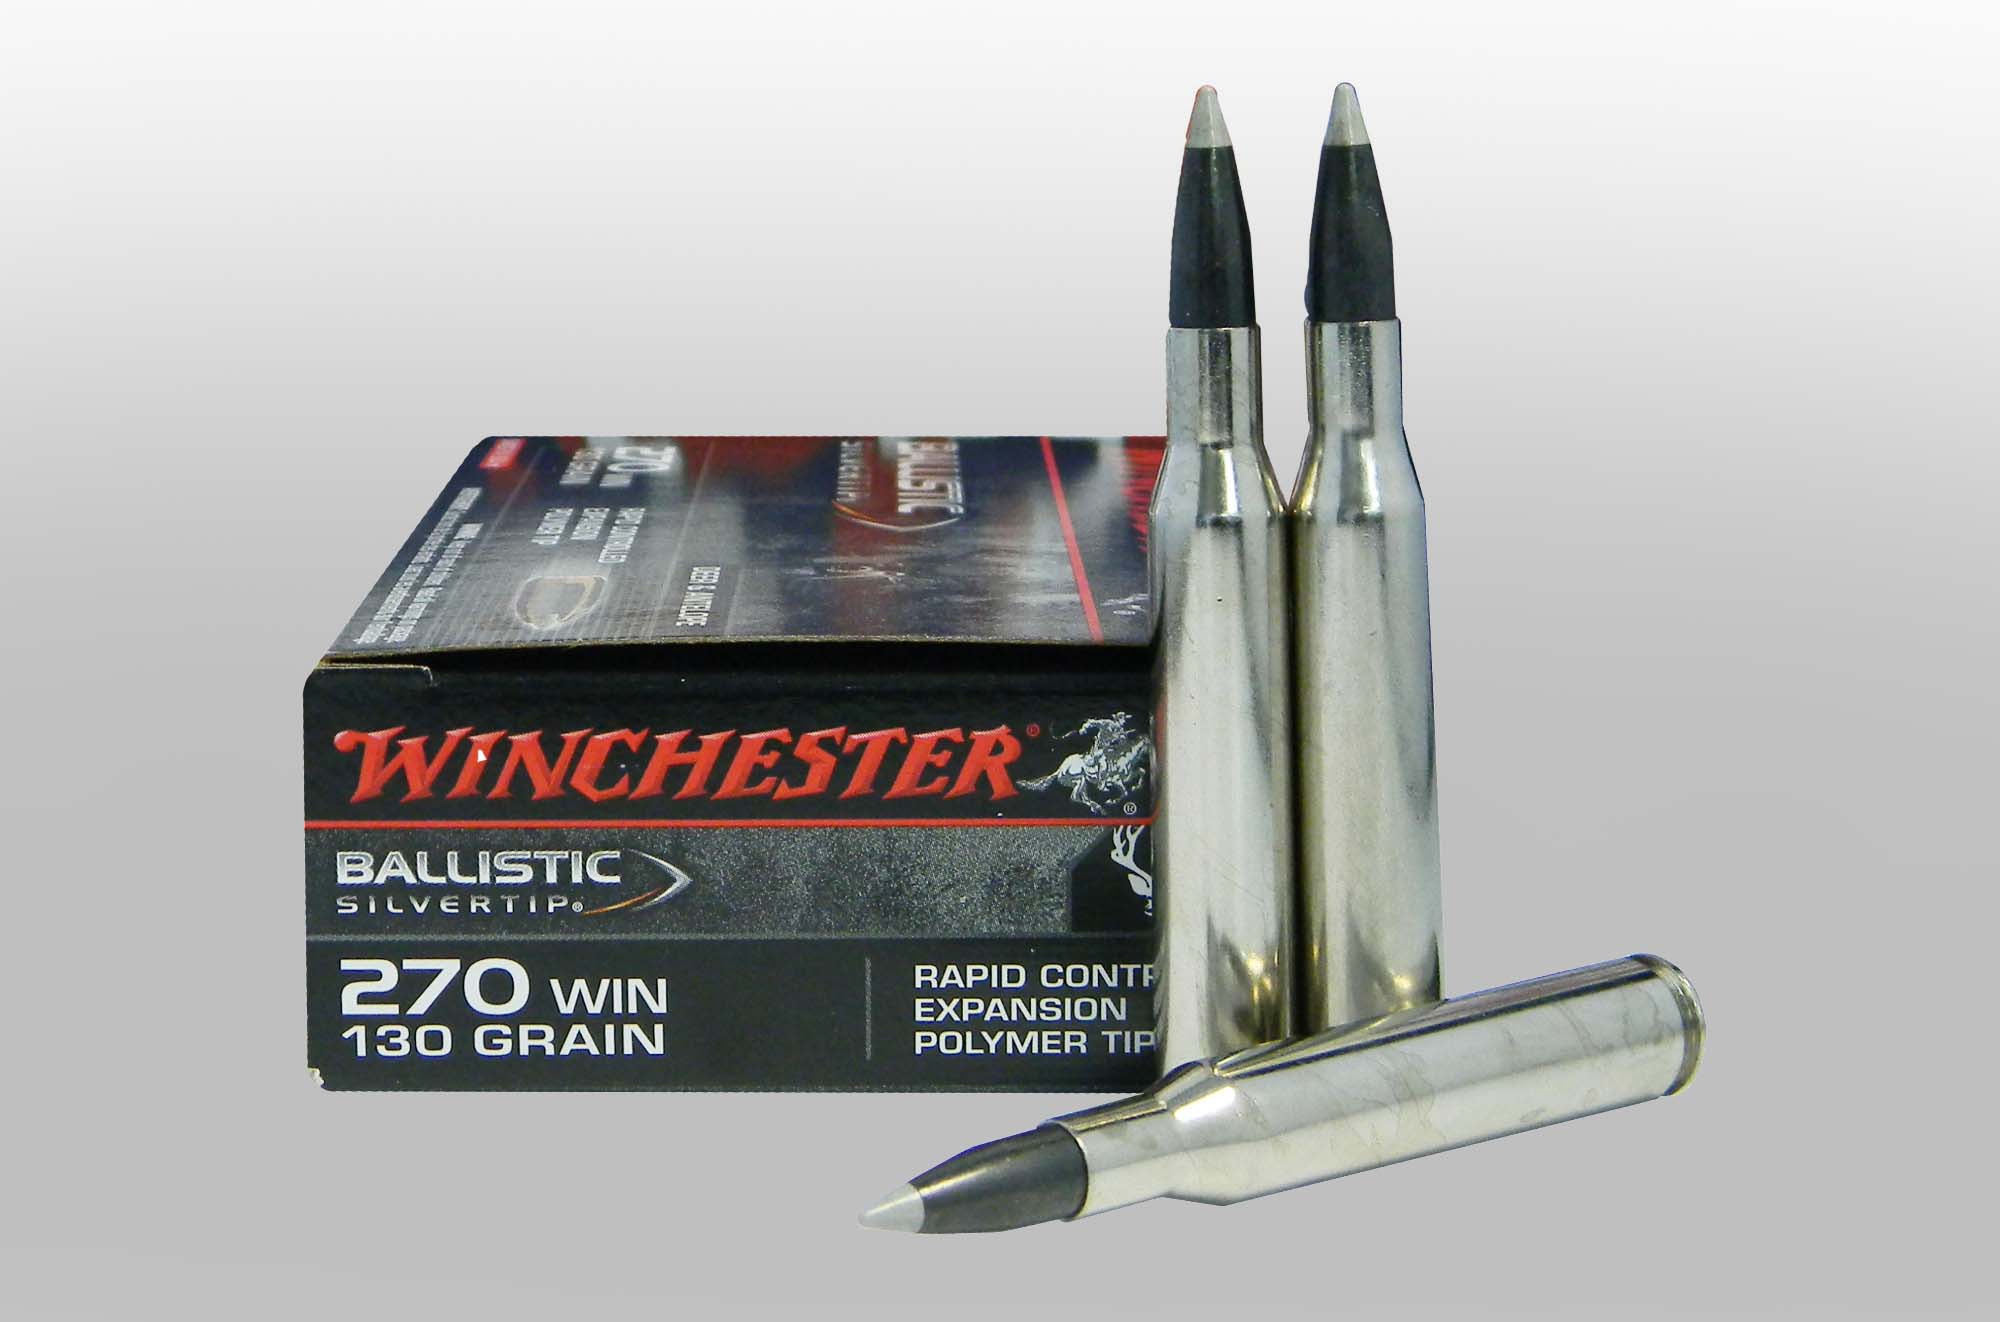 Ammunition: the .270 Winchester cartridge all4shooters